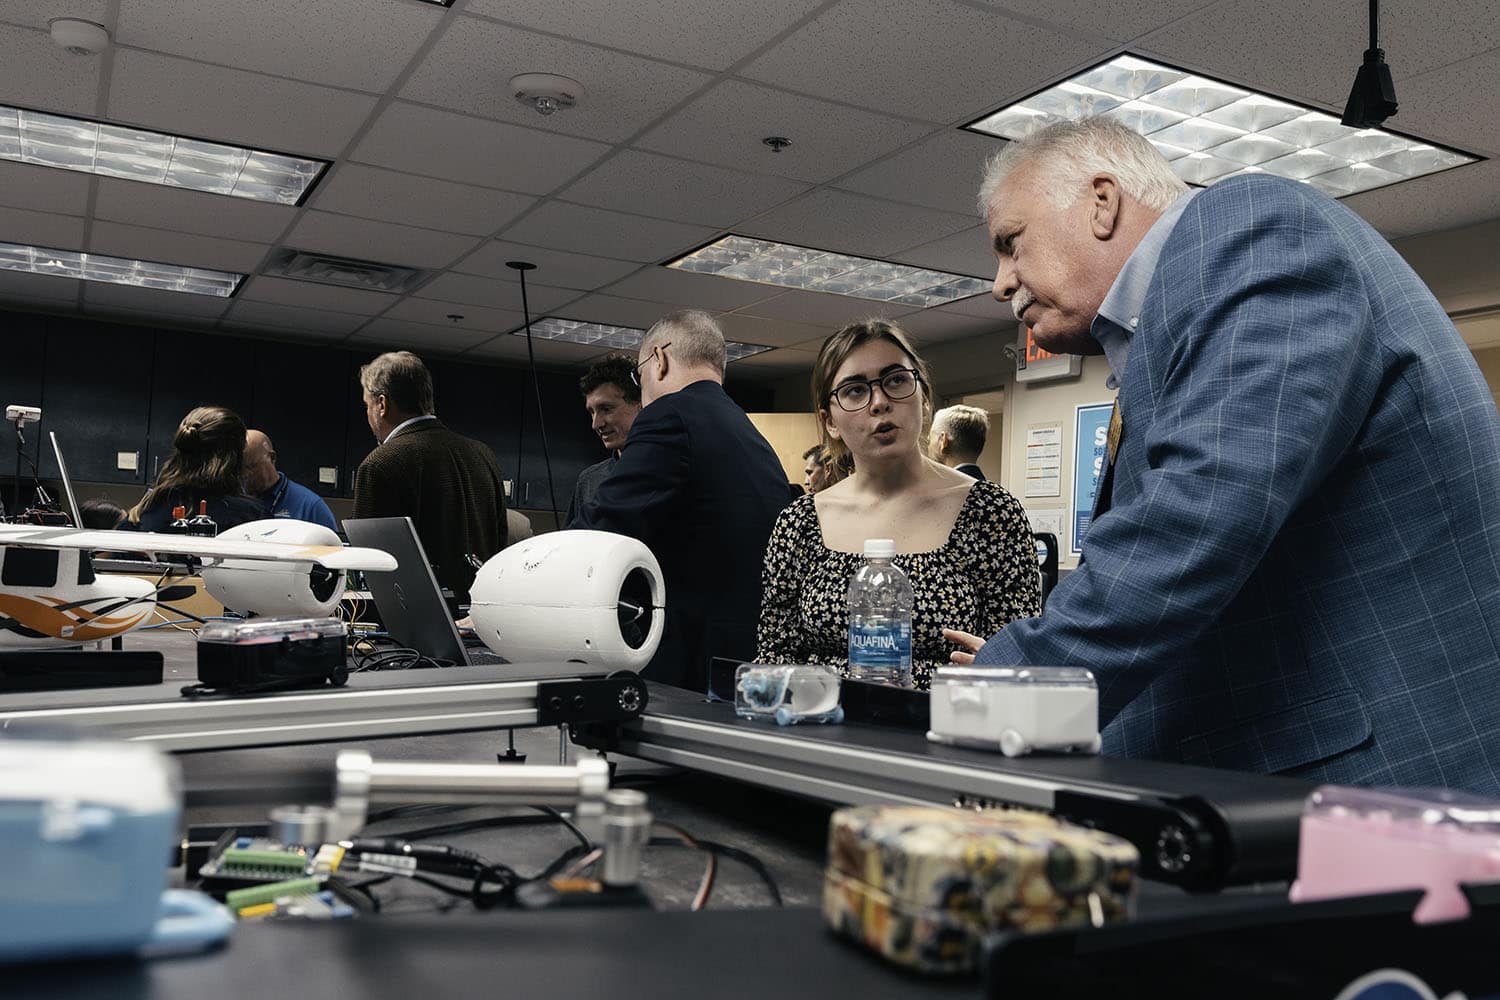 A woman with blonde hair and glasses talks to a man with a white mustache and hair near a table with various computer equipment, including a large drone. Several other people mill about in the background.